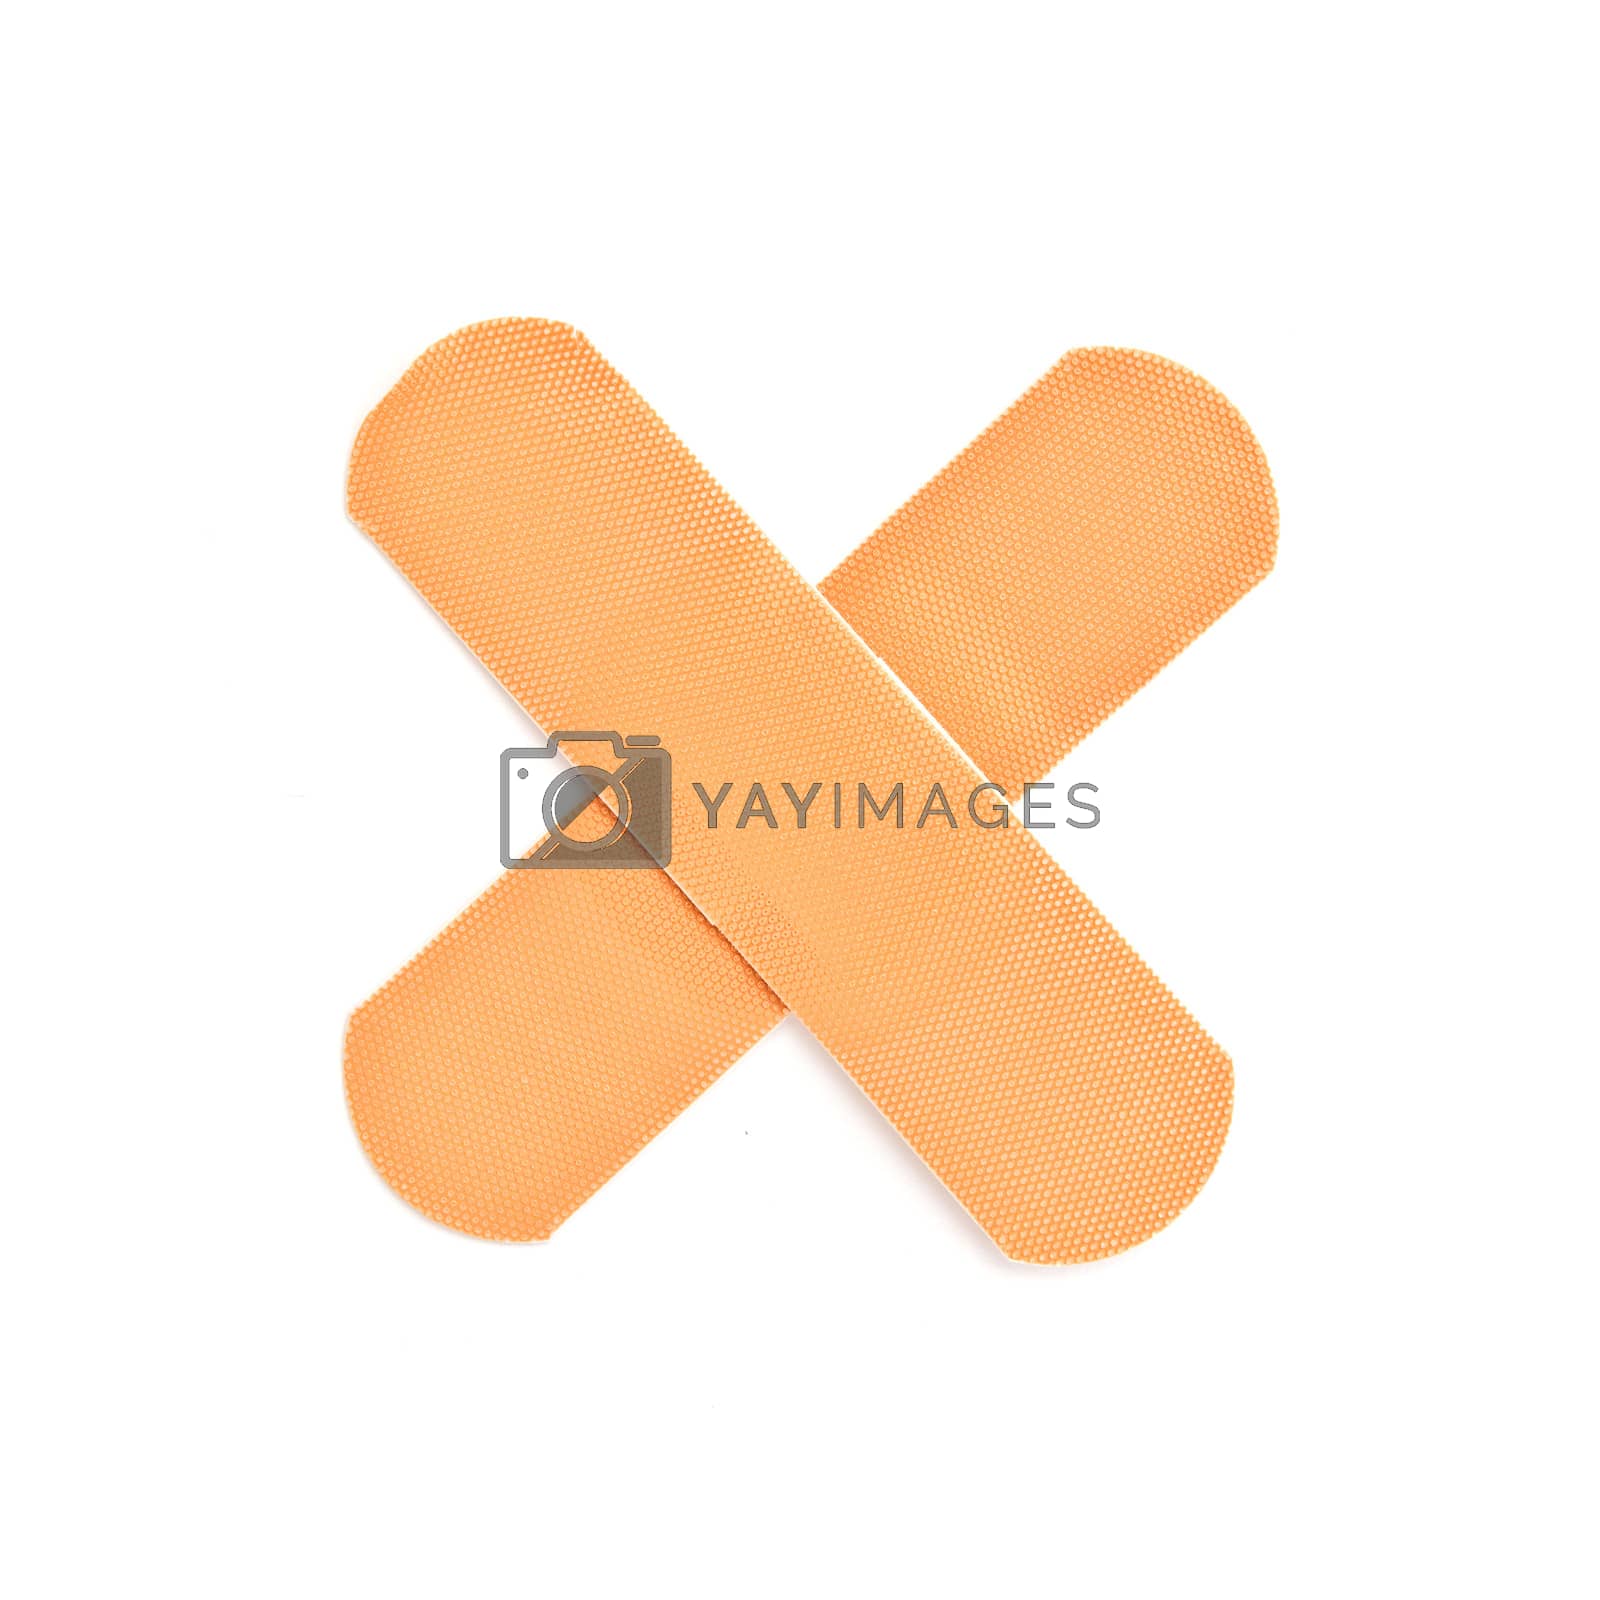 Royalty free image of First aid adhesive plaster by stevanovicigor